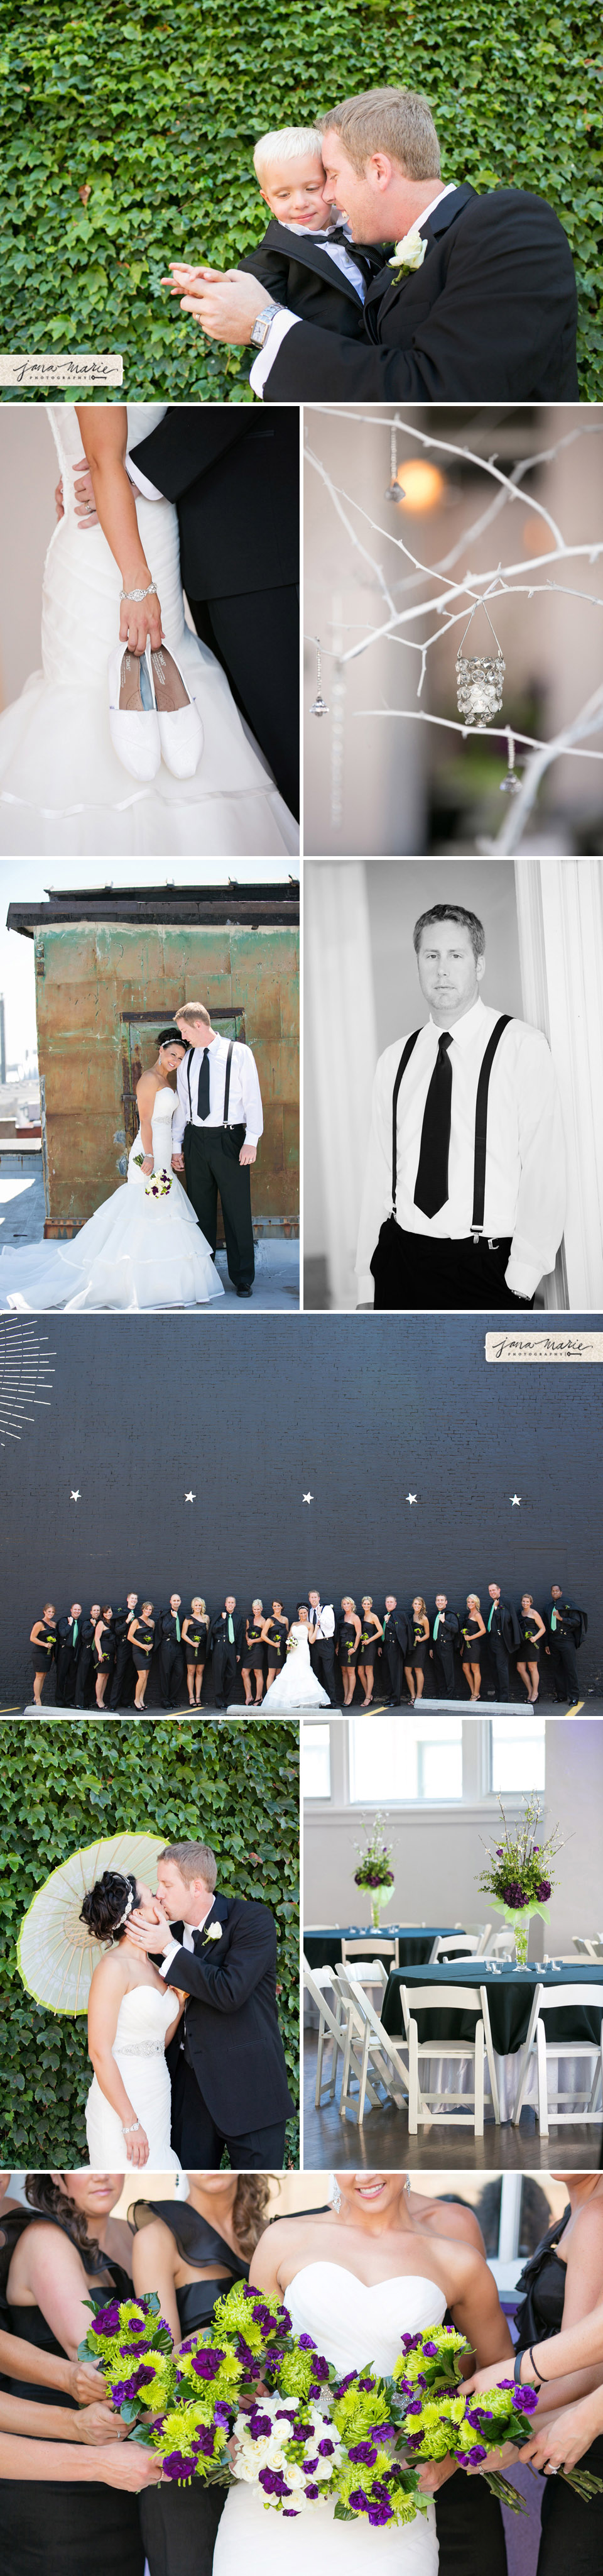 Fleming wedding, black wall, rooftop photos, trumpet dress, large bridal party